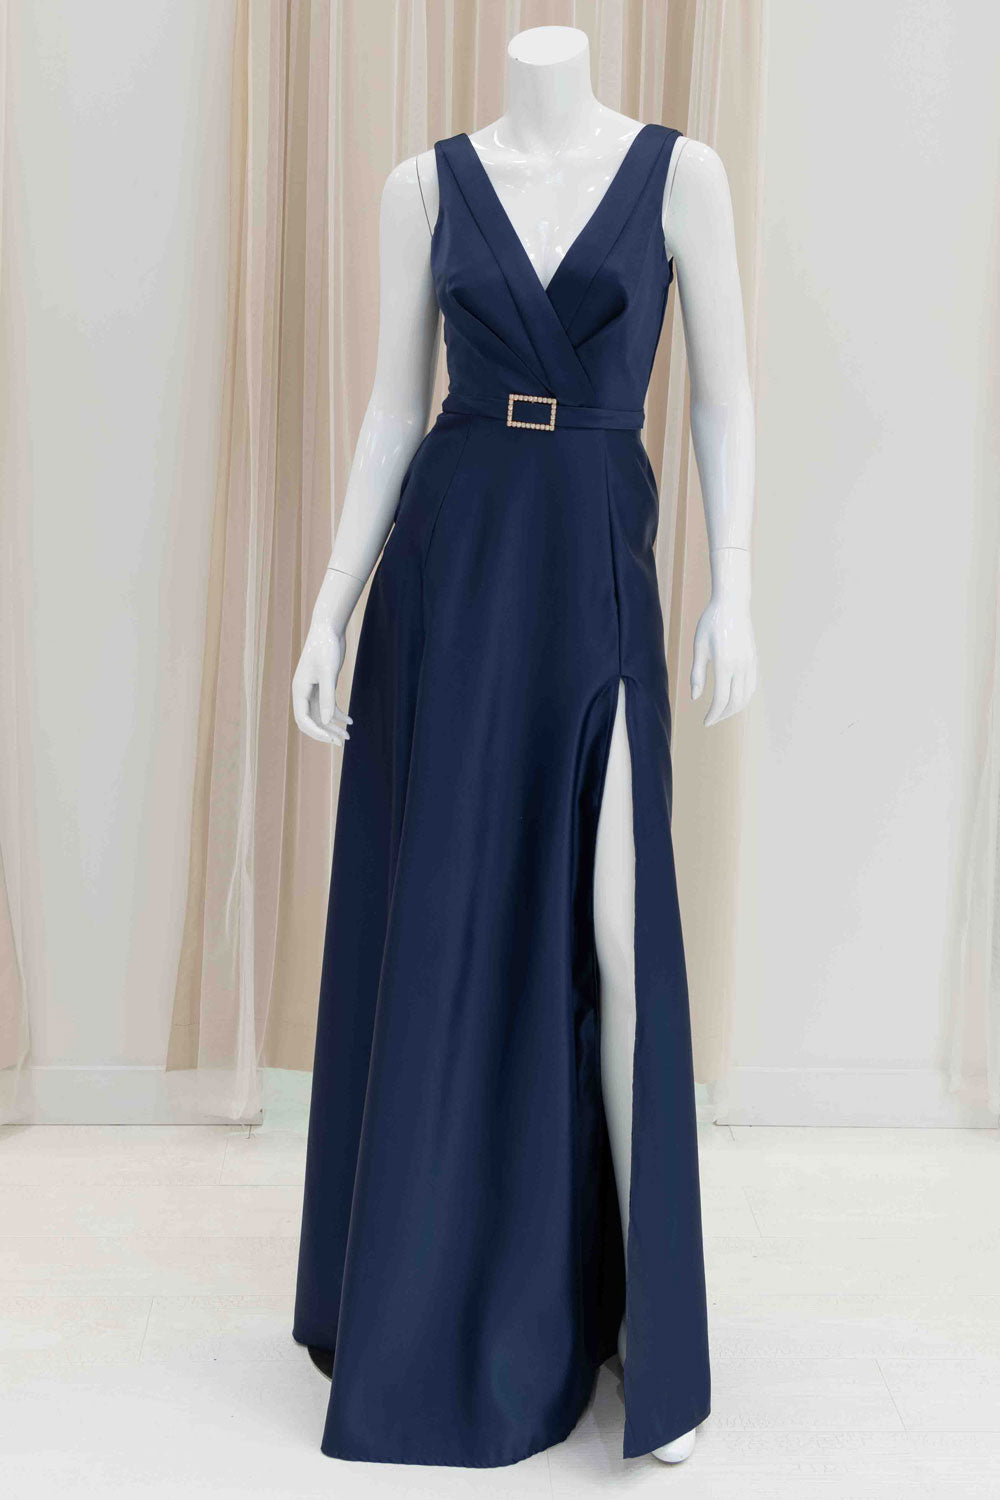 Simple Navy Blue Evening Gown with Slit and Pockets